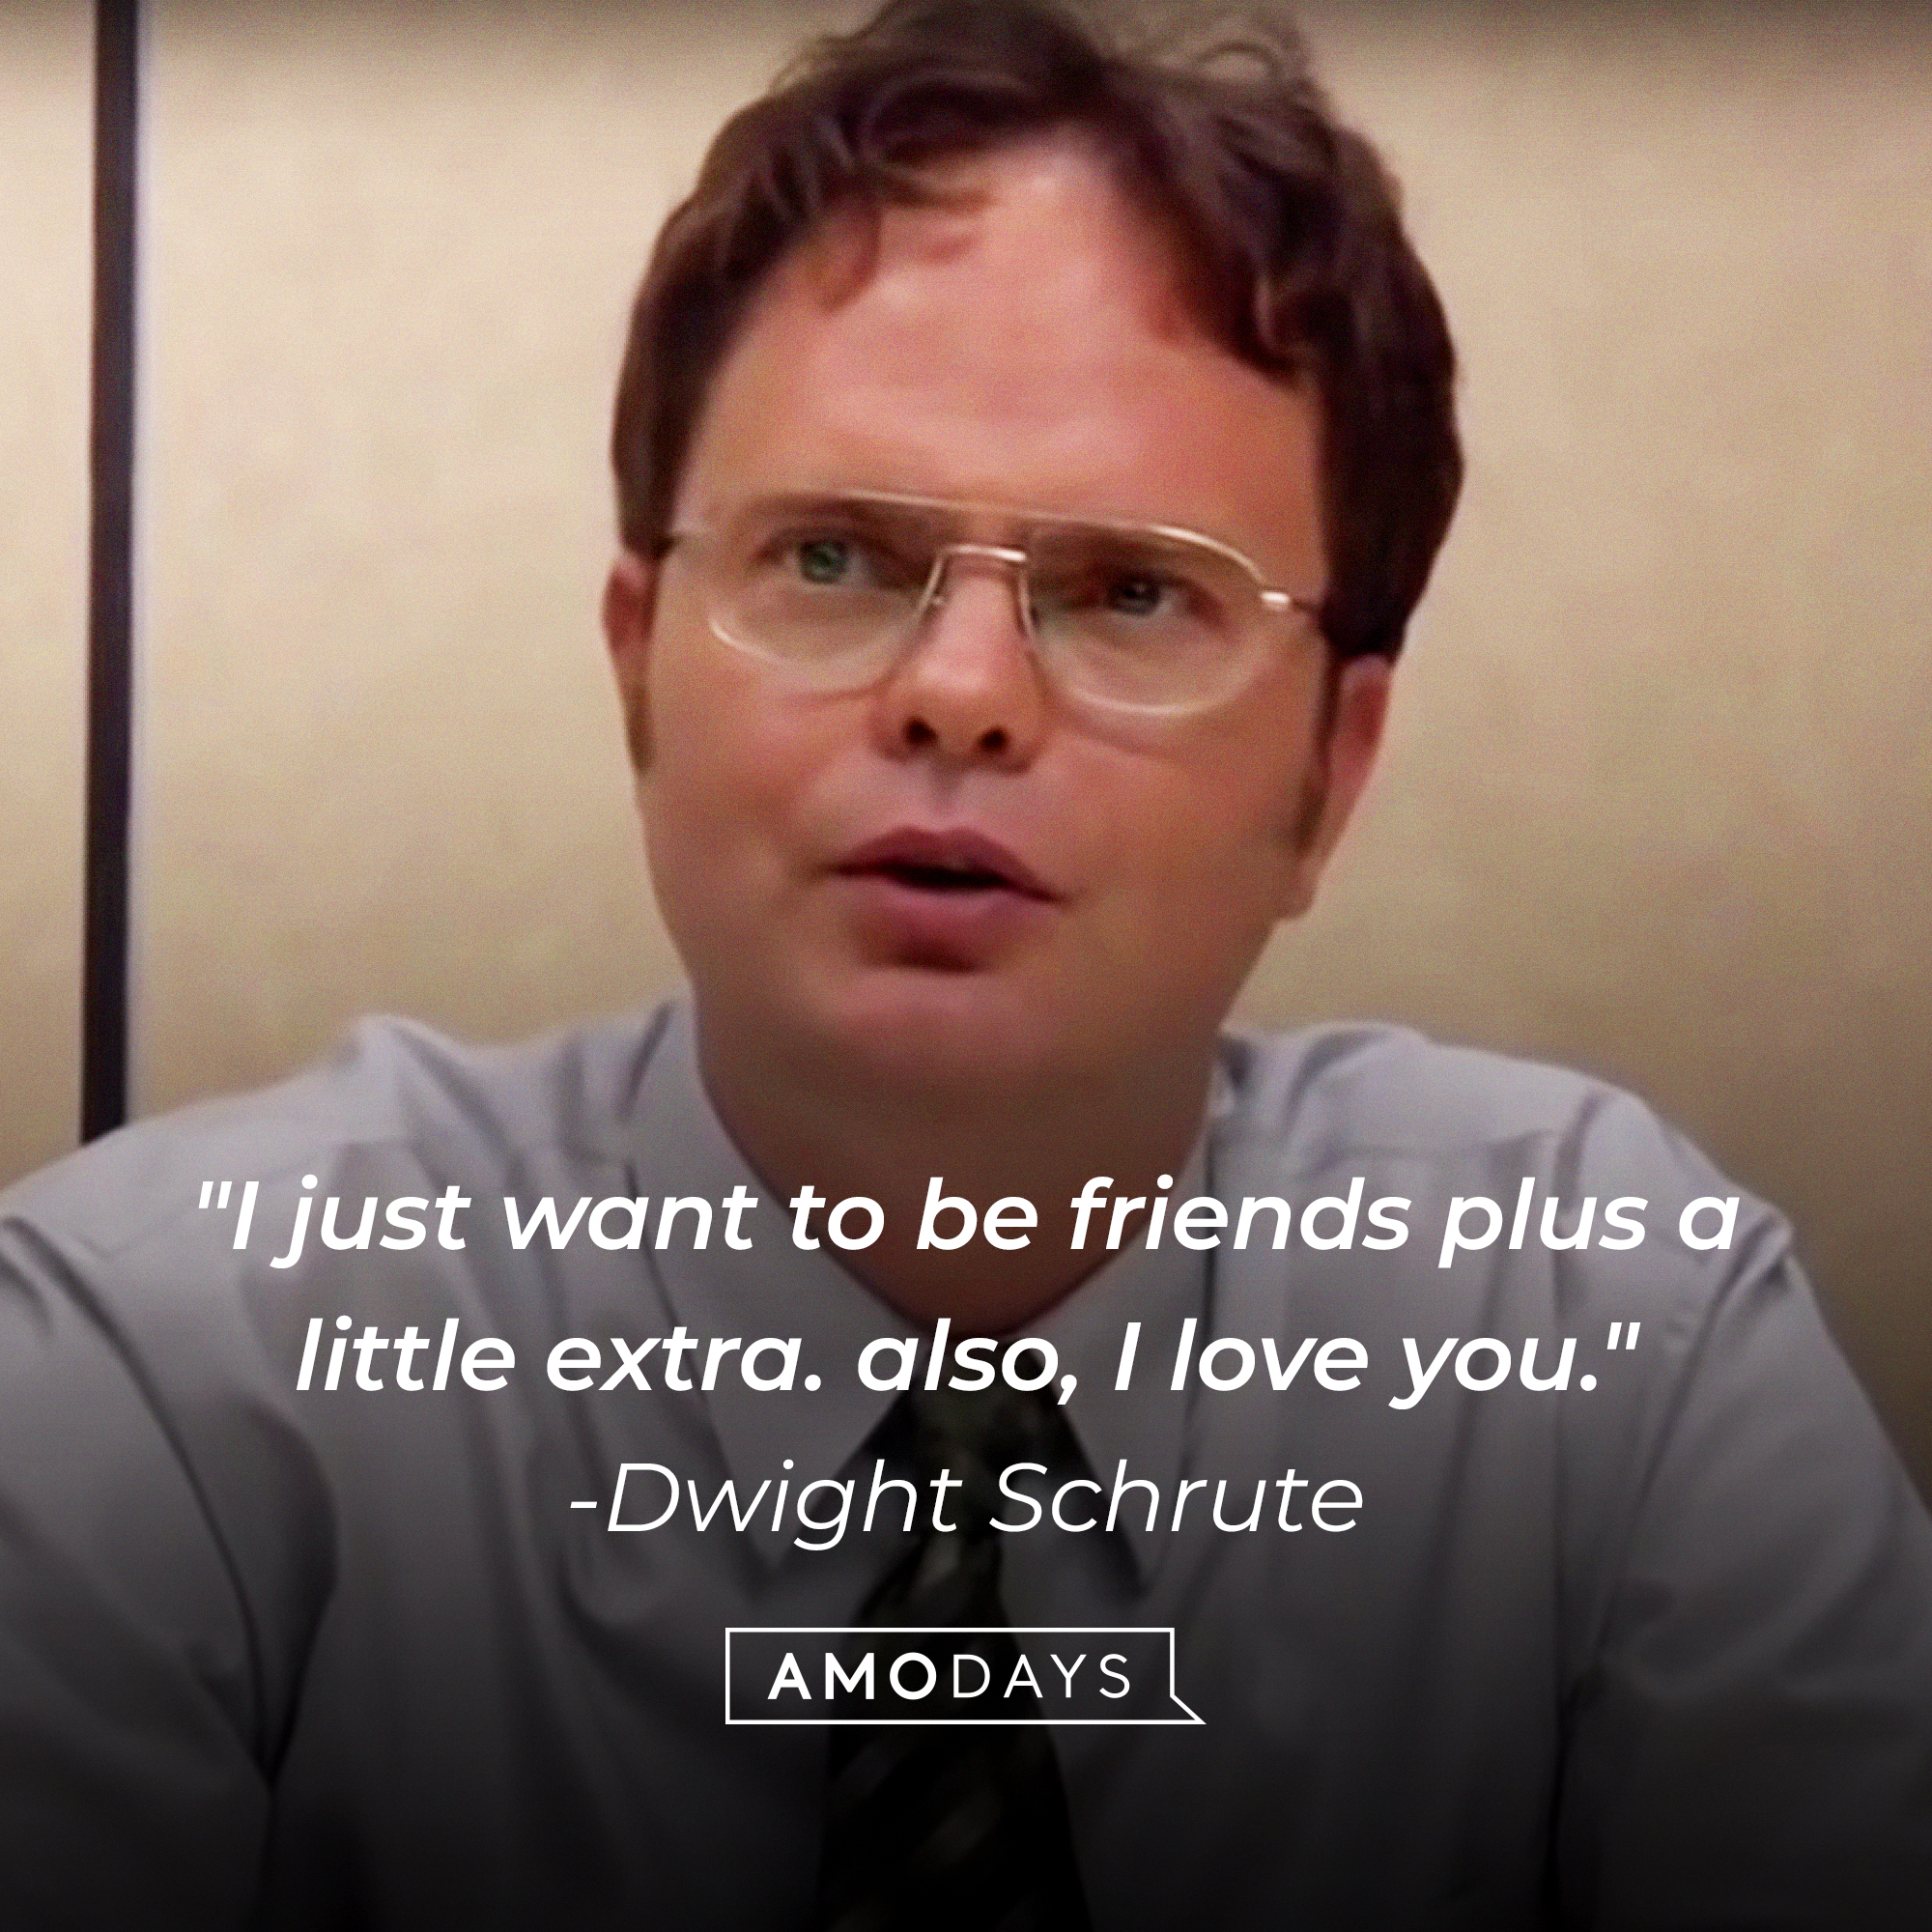 Dwight Schrute's quote: "I just want to be friends plus a little extra. also, I love you." | Source: YouTube/TheOffice